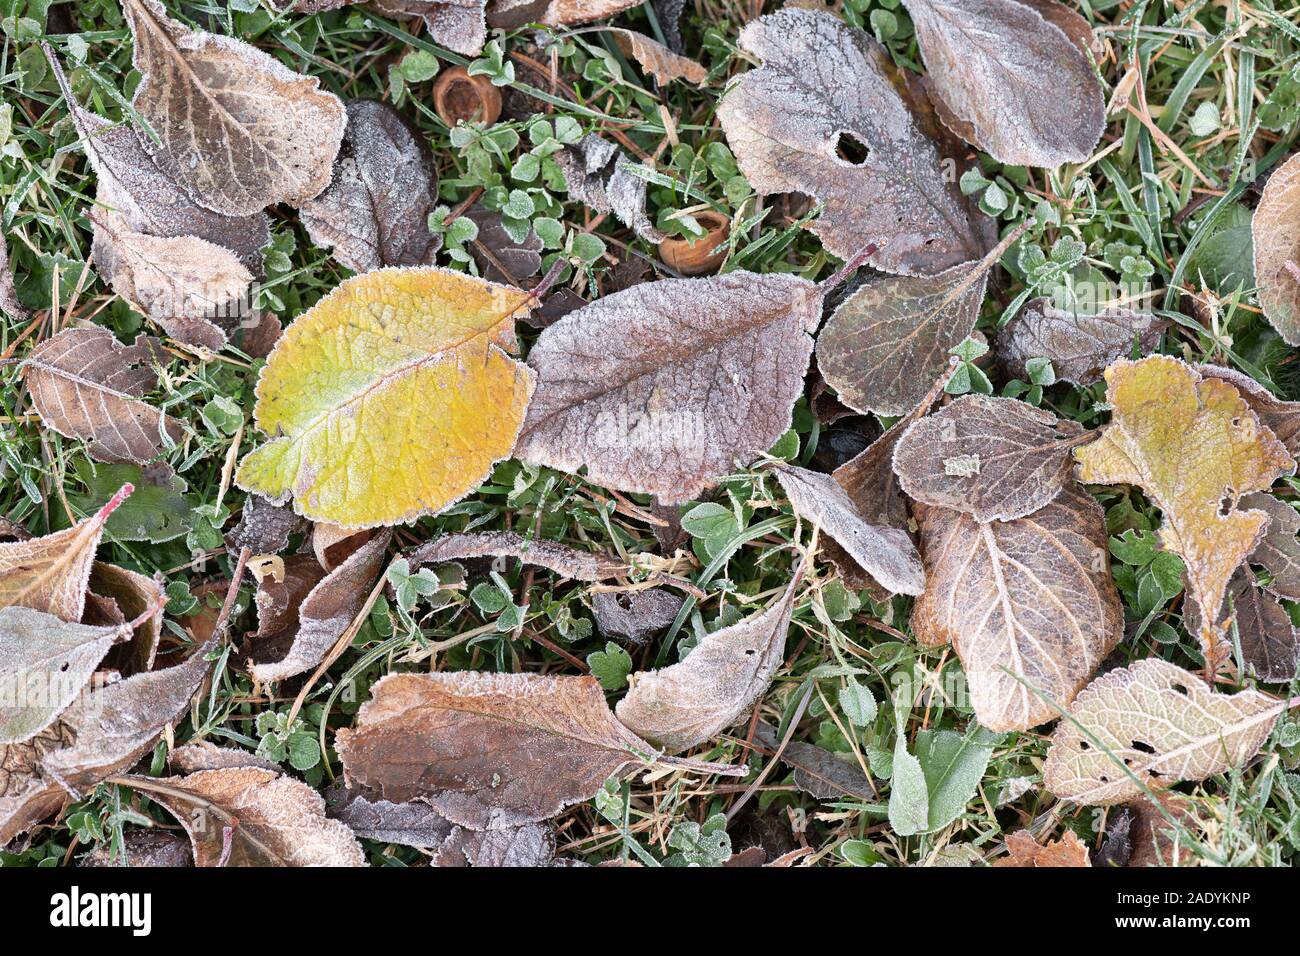 Leaf Litter on a Frosty Morning Showing a Variety of Leaves Including,  but Not Exclusively, Leaves From a Plum Tree (Prunus Domestica) Stock Photo